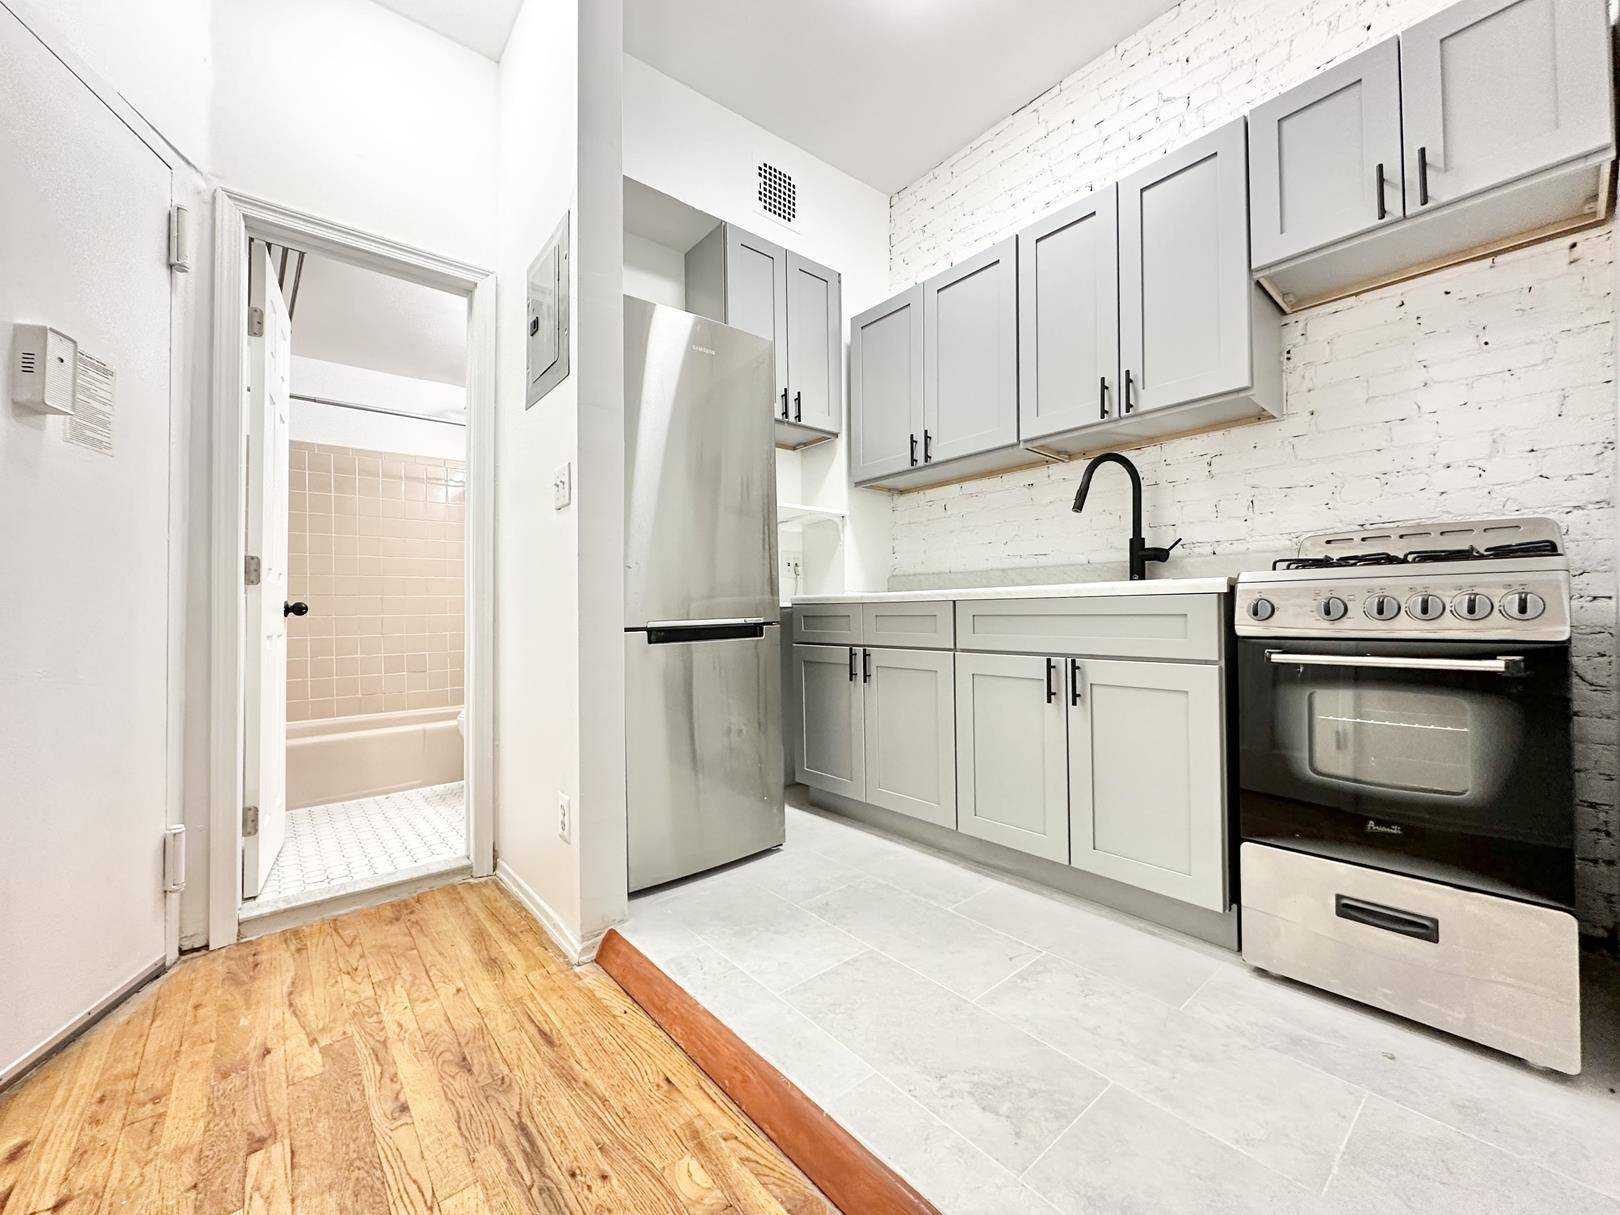 Just 3 flights up. Renovated 2bed or large 1 bed w spacious living room duplex.